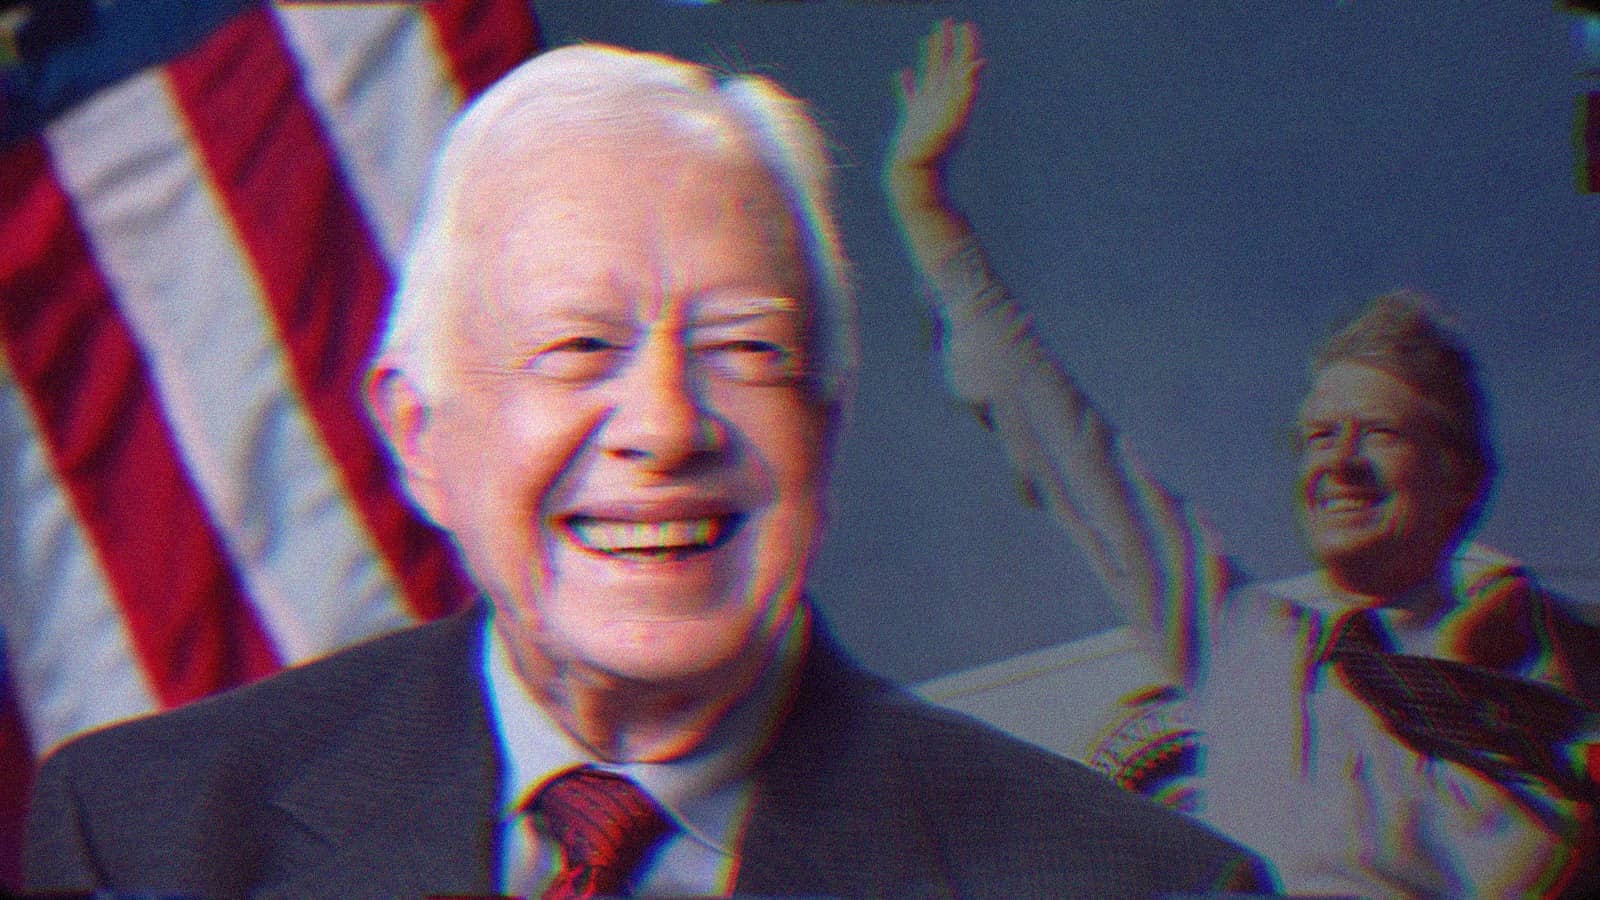 An older Jimmy Carter, smiling. Behind him to his right is a young Jimmy Carter, waving.